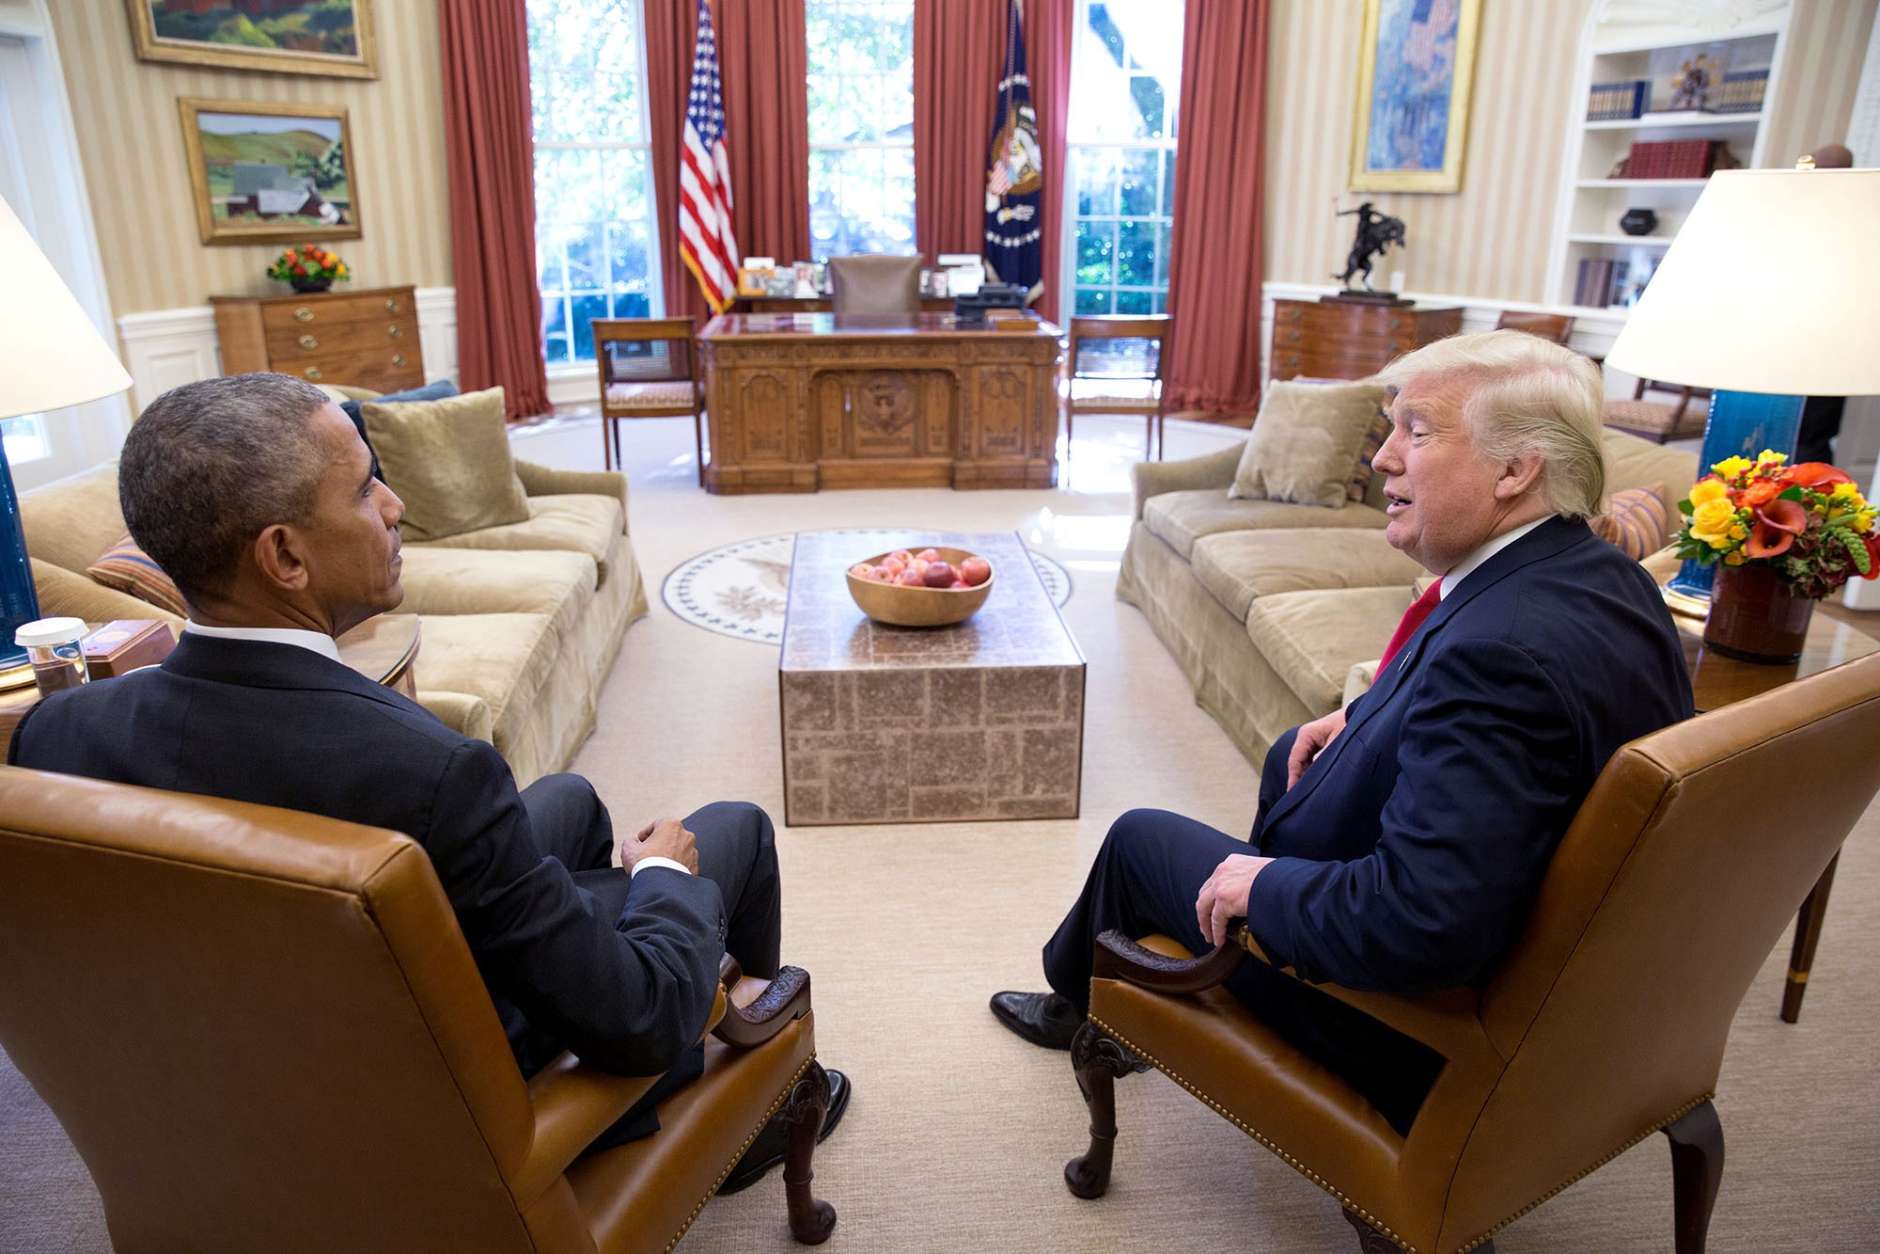 Nov. 10, 2016
“Two days after the election, the President meets with President-elect Donald Trump.” (Official White House Photo by Pete Souza)